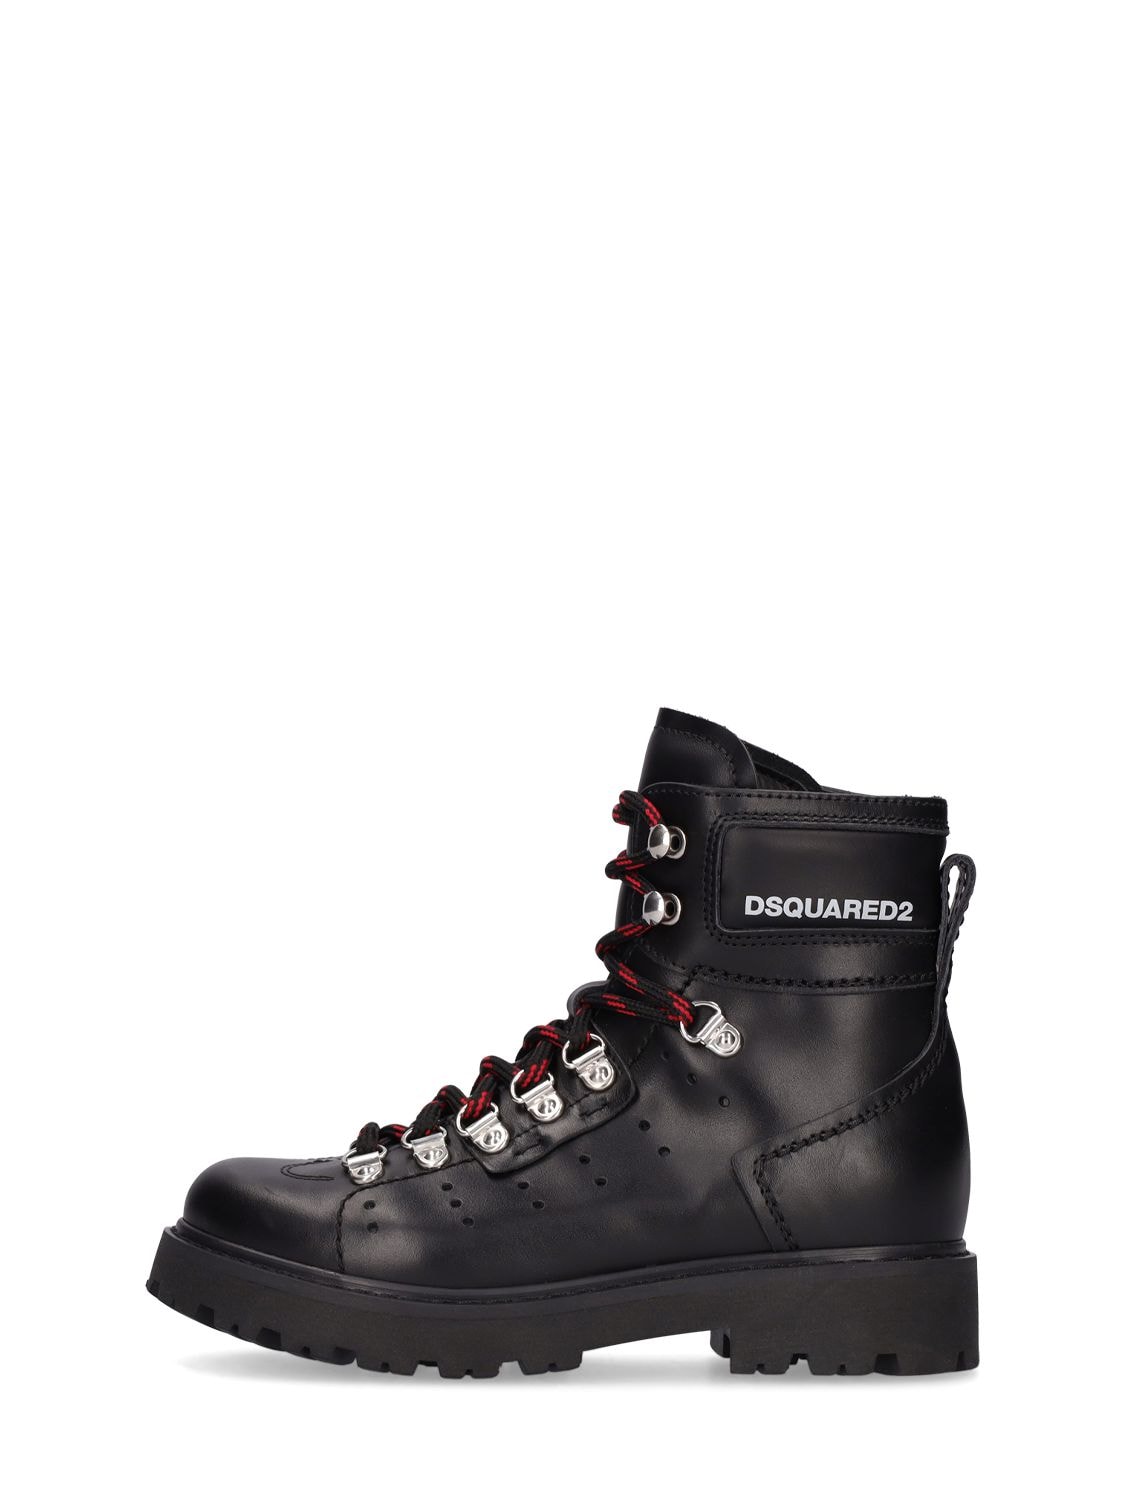 Ultimate Leather Zip Lace-up Boots Luisaviaroma Men Shoes Boots Lace-up Boots 